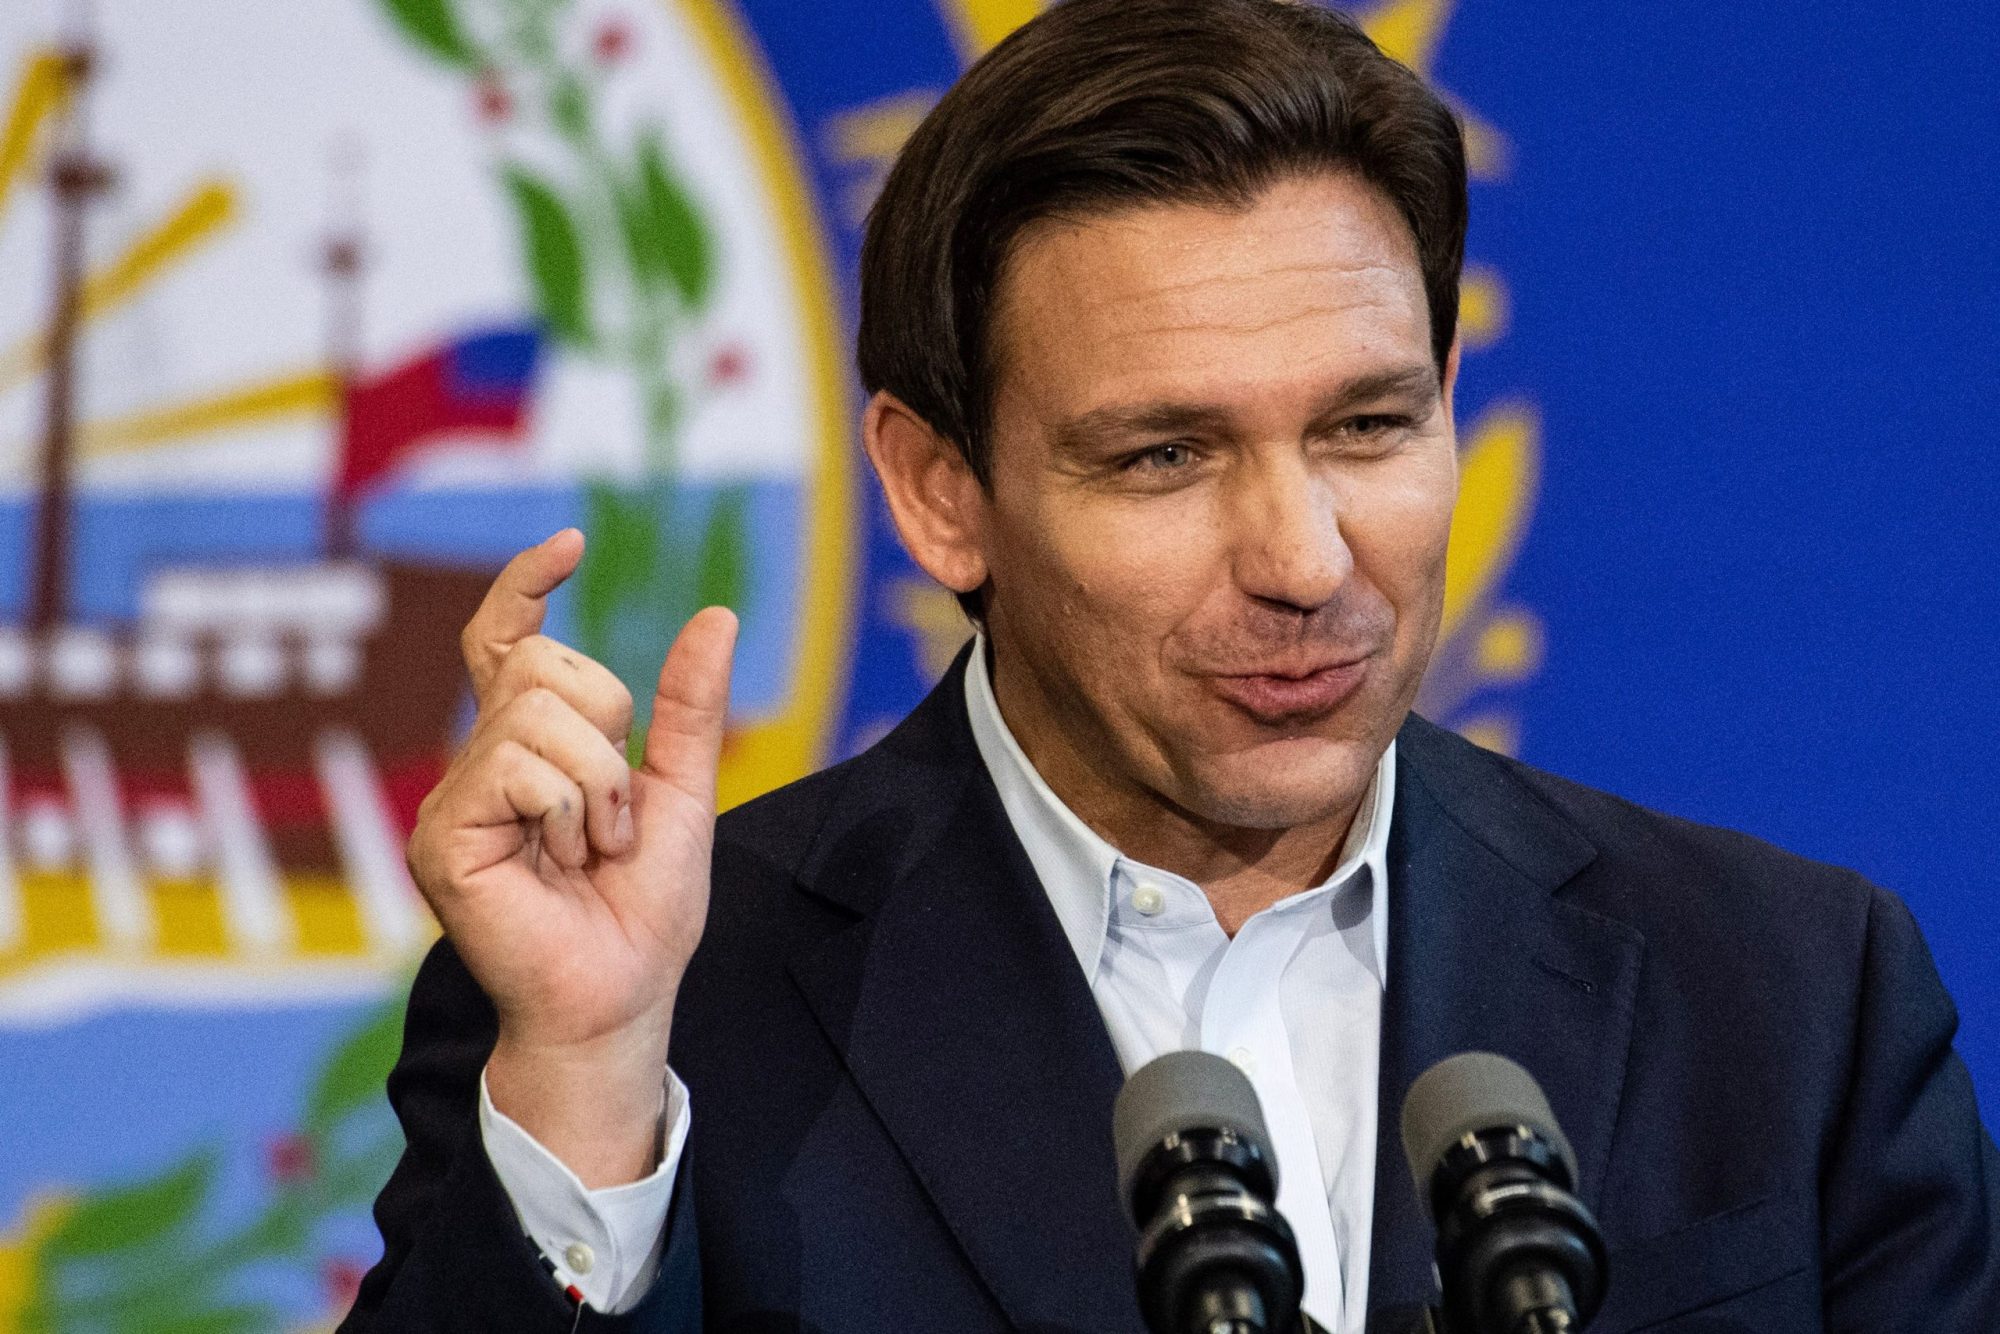 Florida Governor and 2024 hopeful Ron DeSantis speaks during a campaign stop at Manchester Community College in Manchester, New Hampshire, on June 1, 2023. Photo by JOSEPH PREZIOSO/AFP via Getty Images